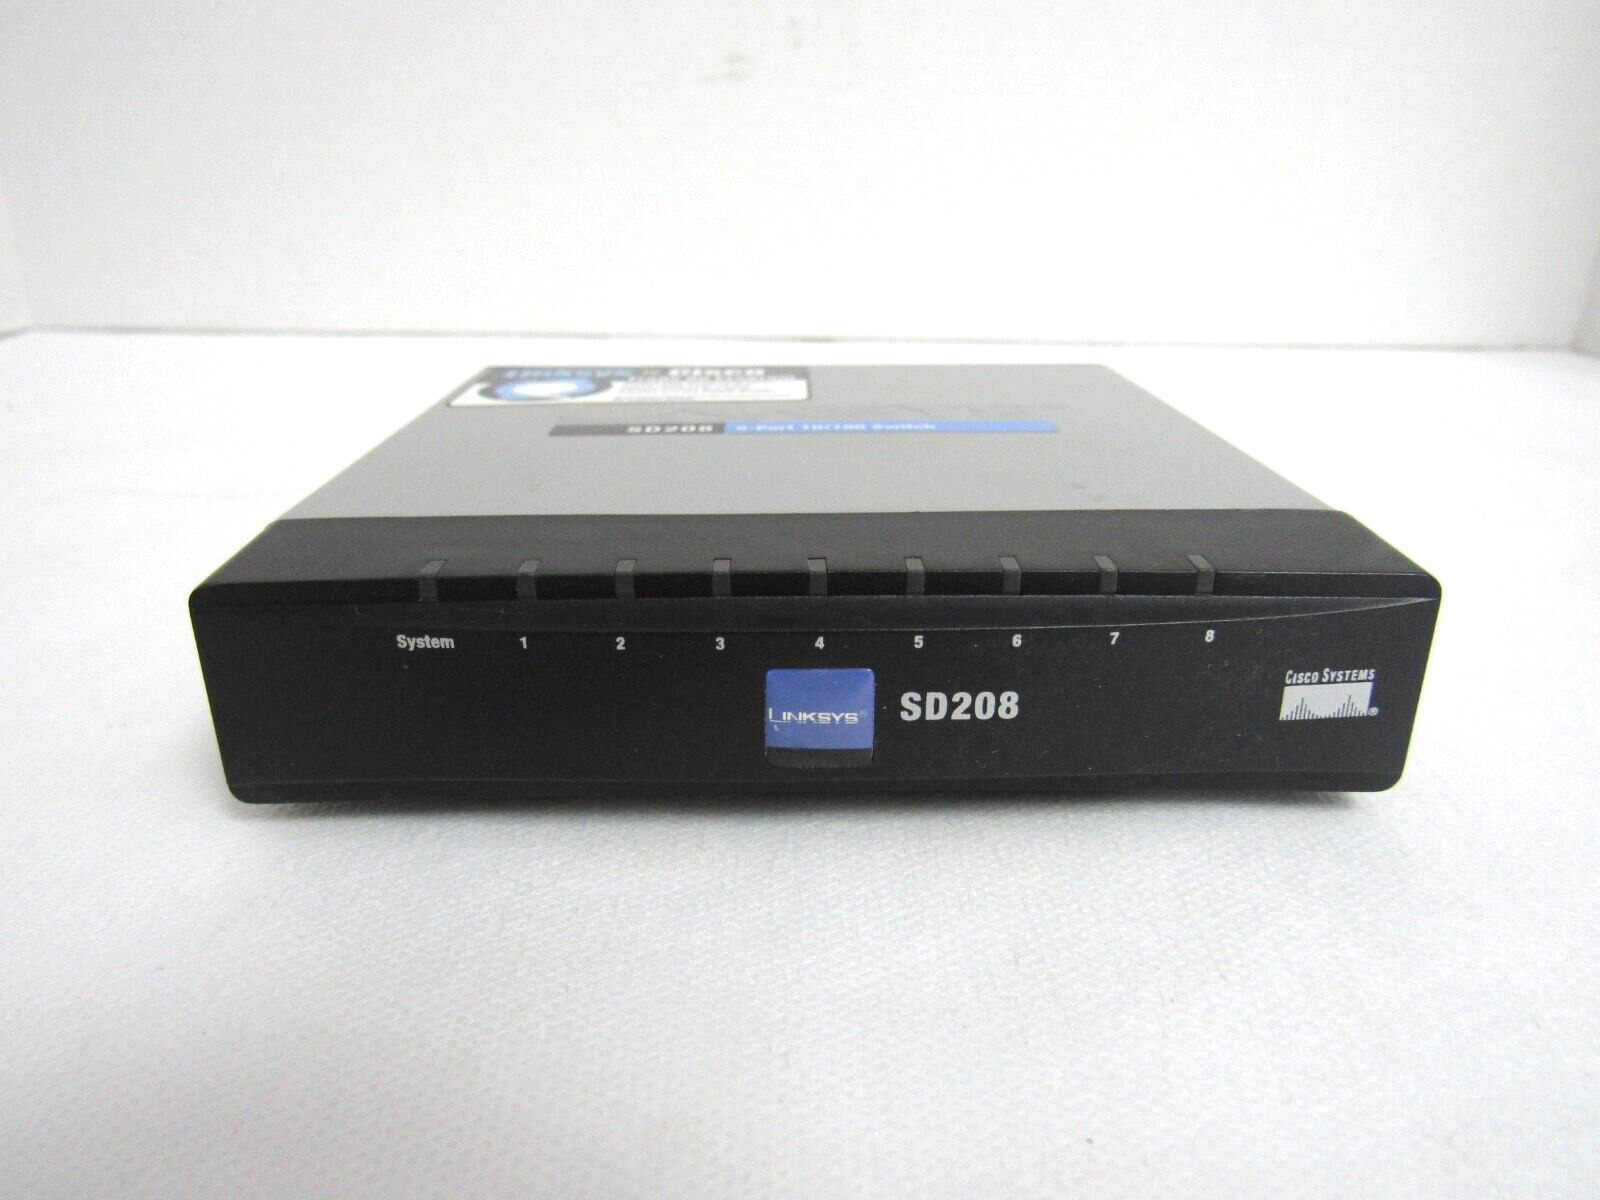 LINKSYS SD208 / CICCO SYSTEMS 8-PORT 10/100 NETWORK SWITCH